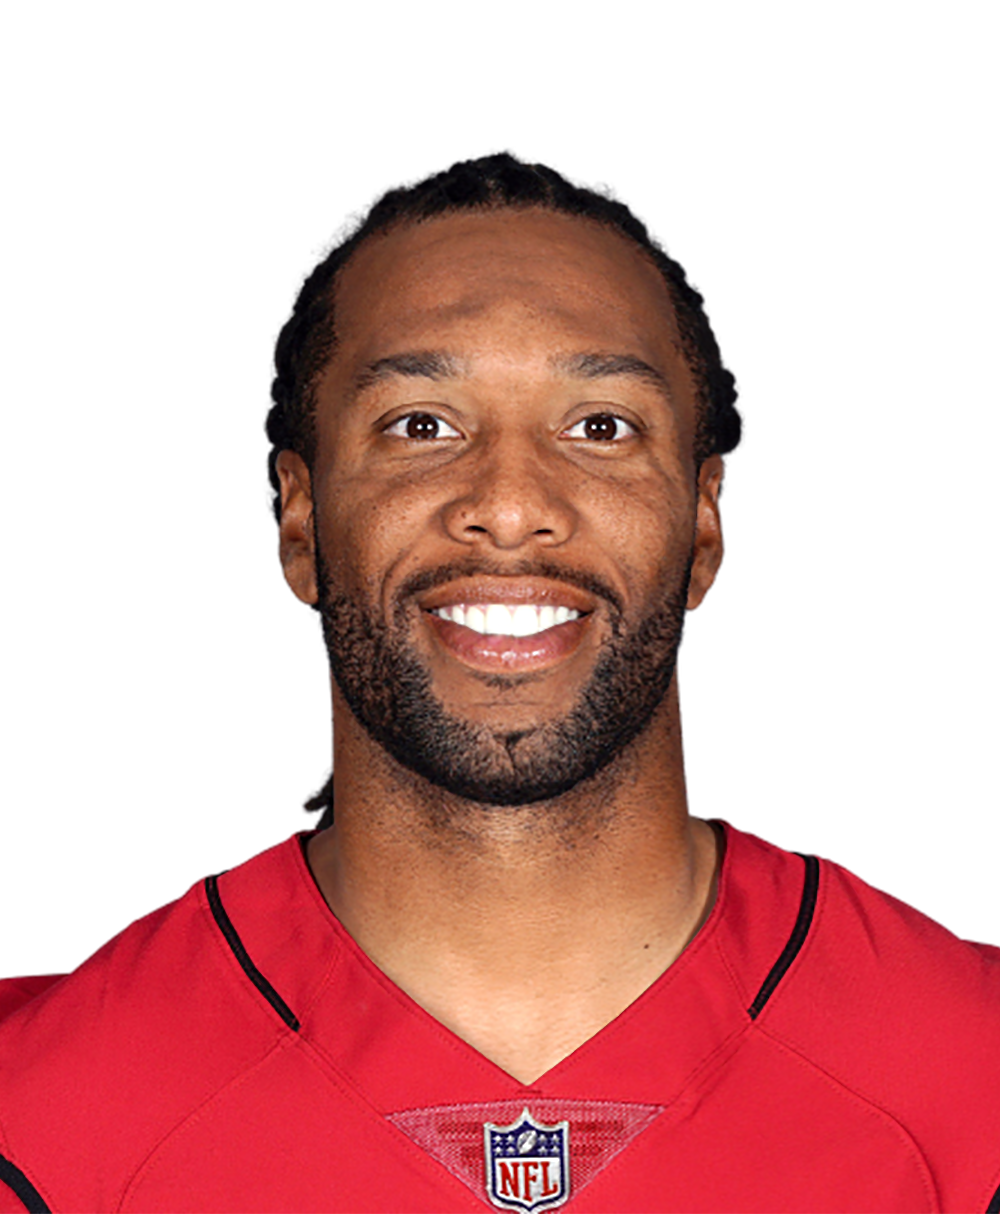 Recent Super Bowl champion tried to sign Larry Fitzgerald in 2021